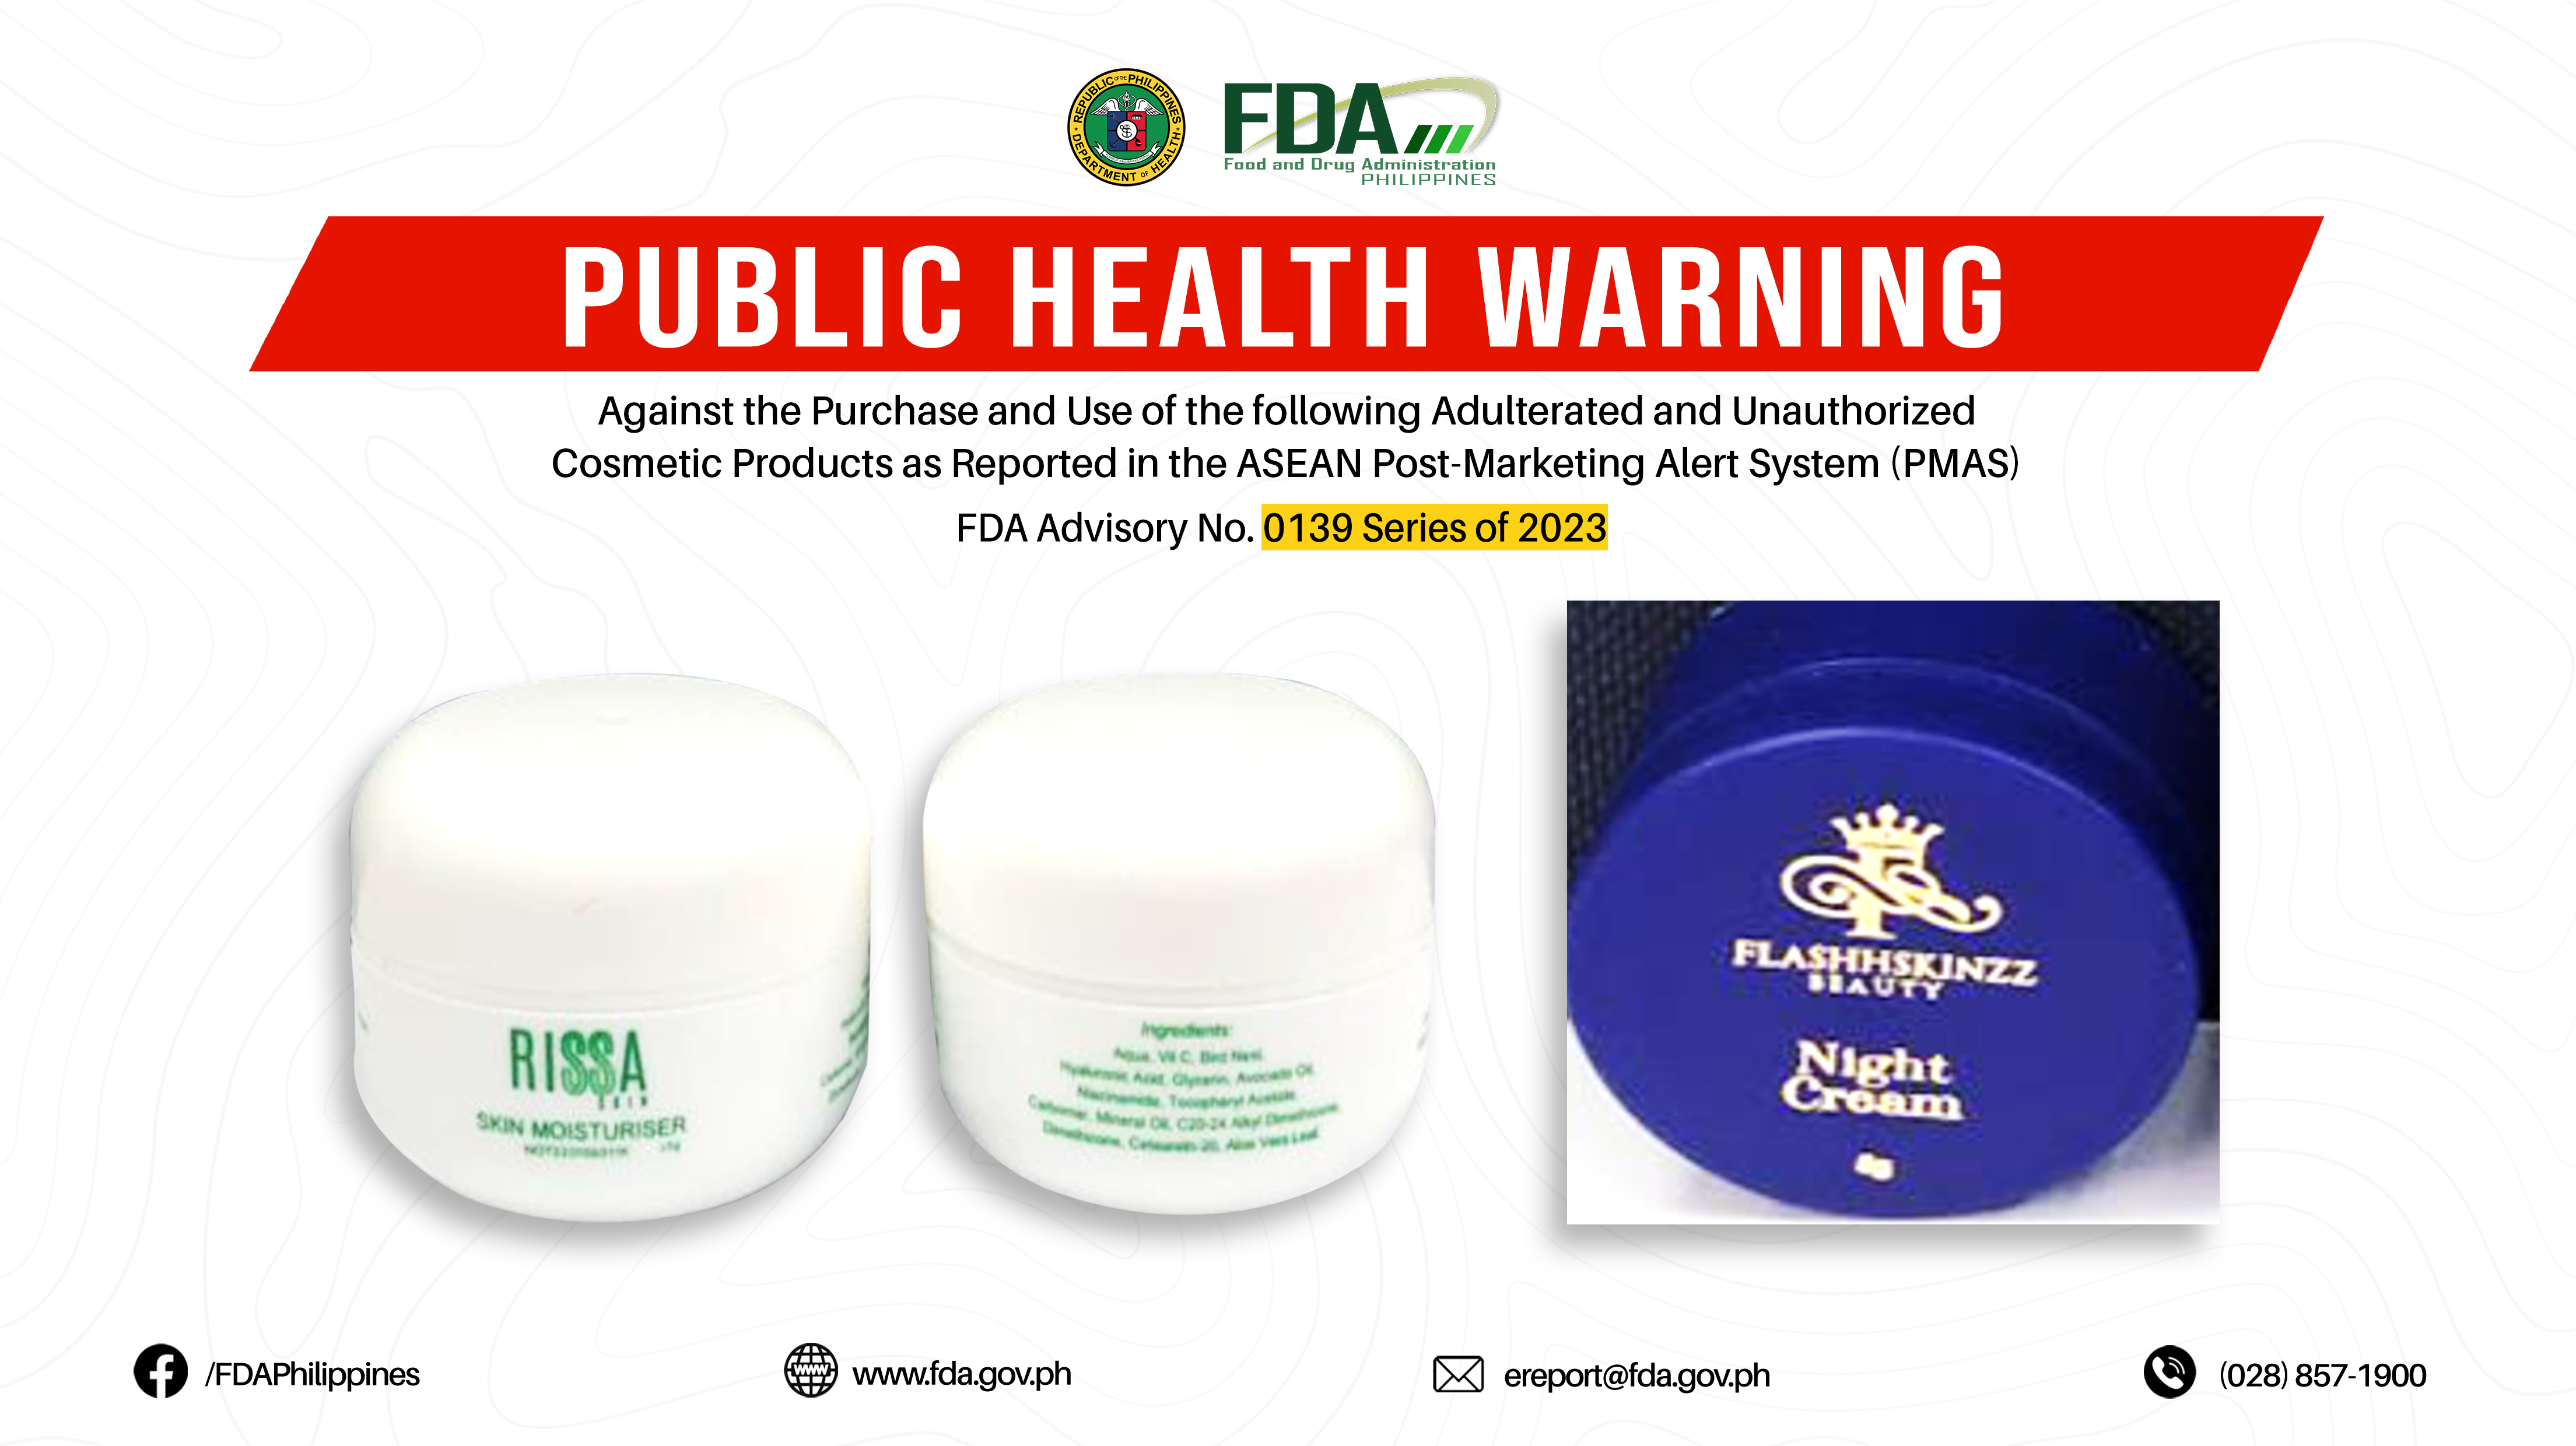 FDA Advisory No.2023-0139 || Public Health Warning Against the Purchase and Use of the following Adulterated Cosmetic Products as Reported in the ASEAN Post-Marketing Alert System (PMAS):